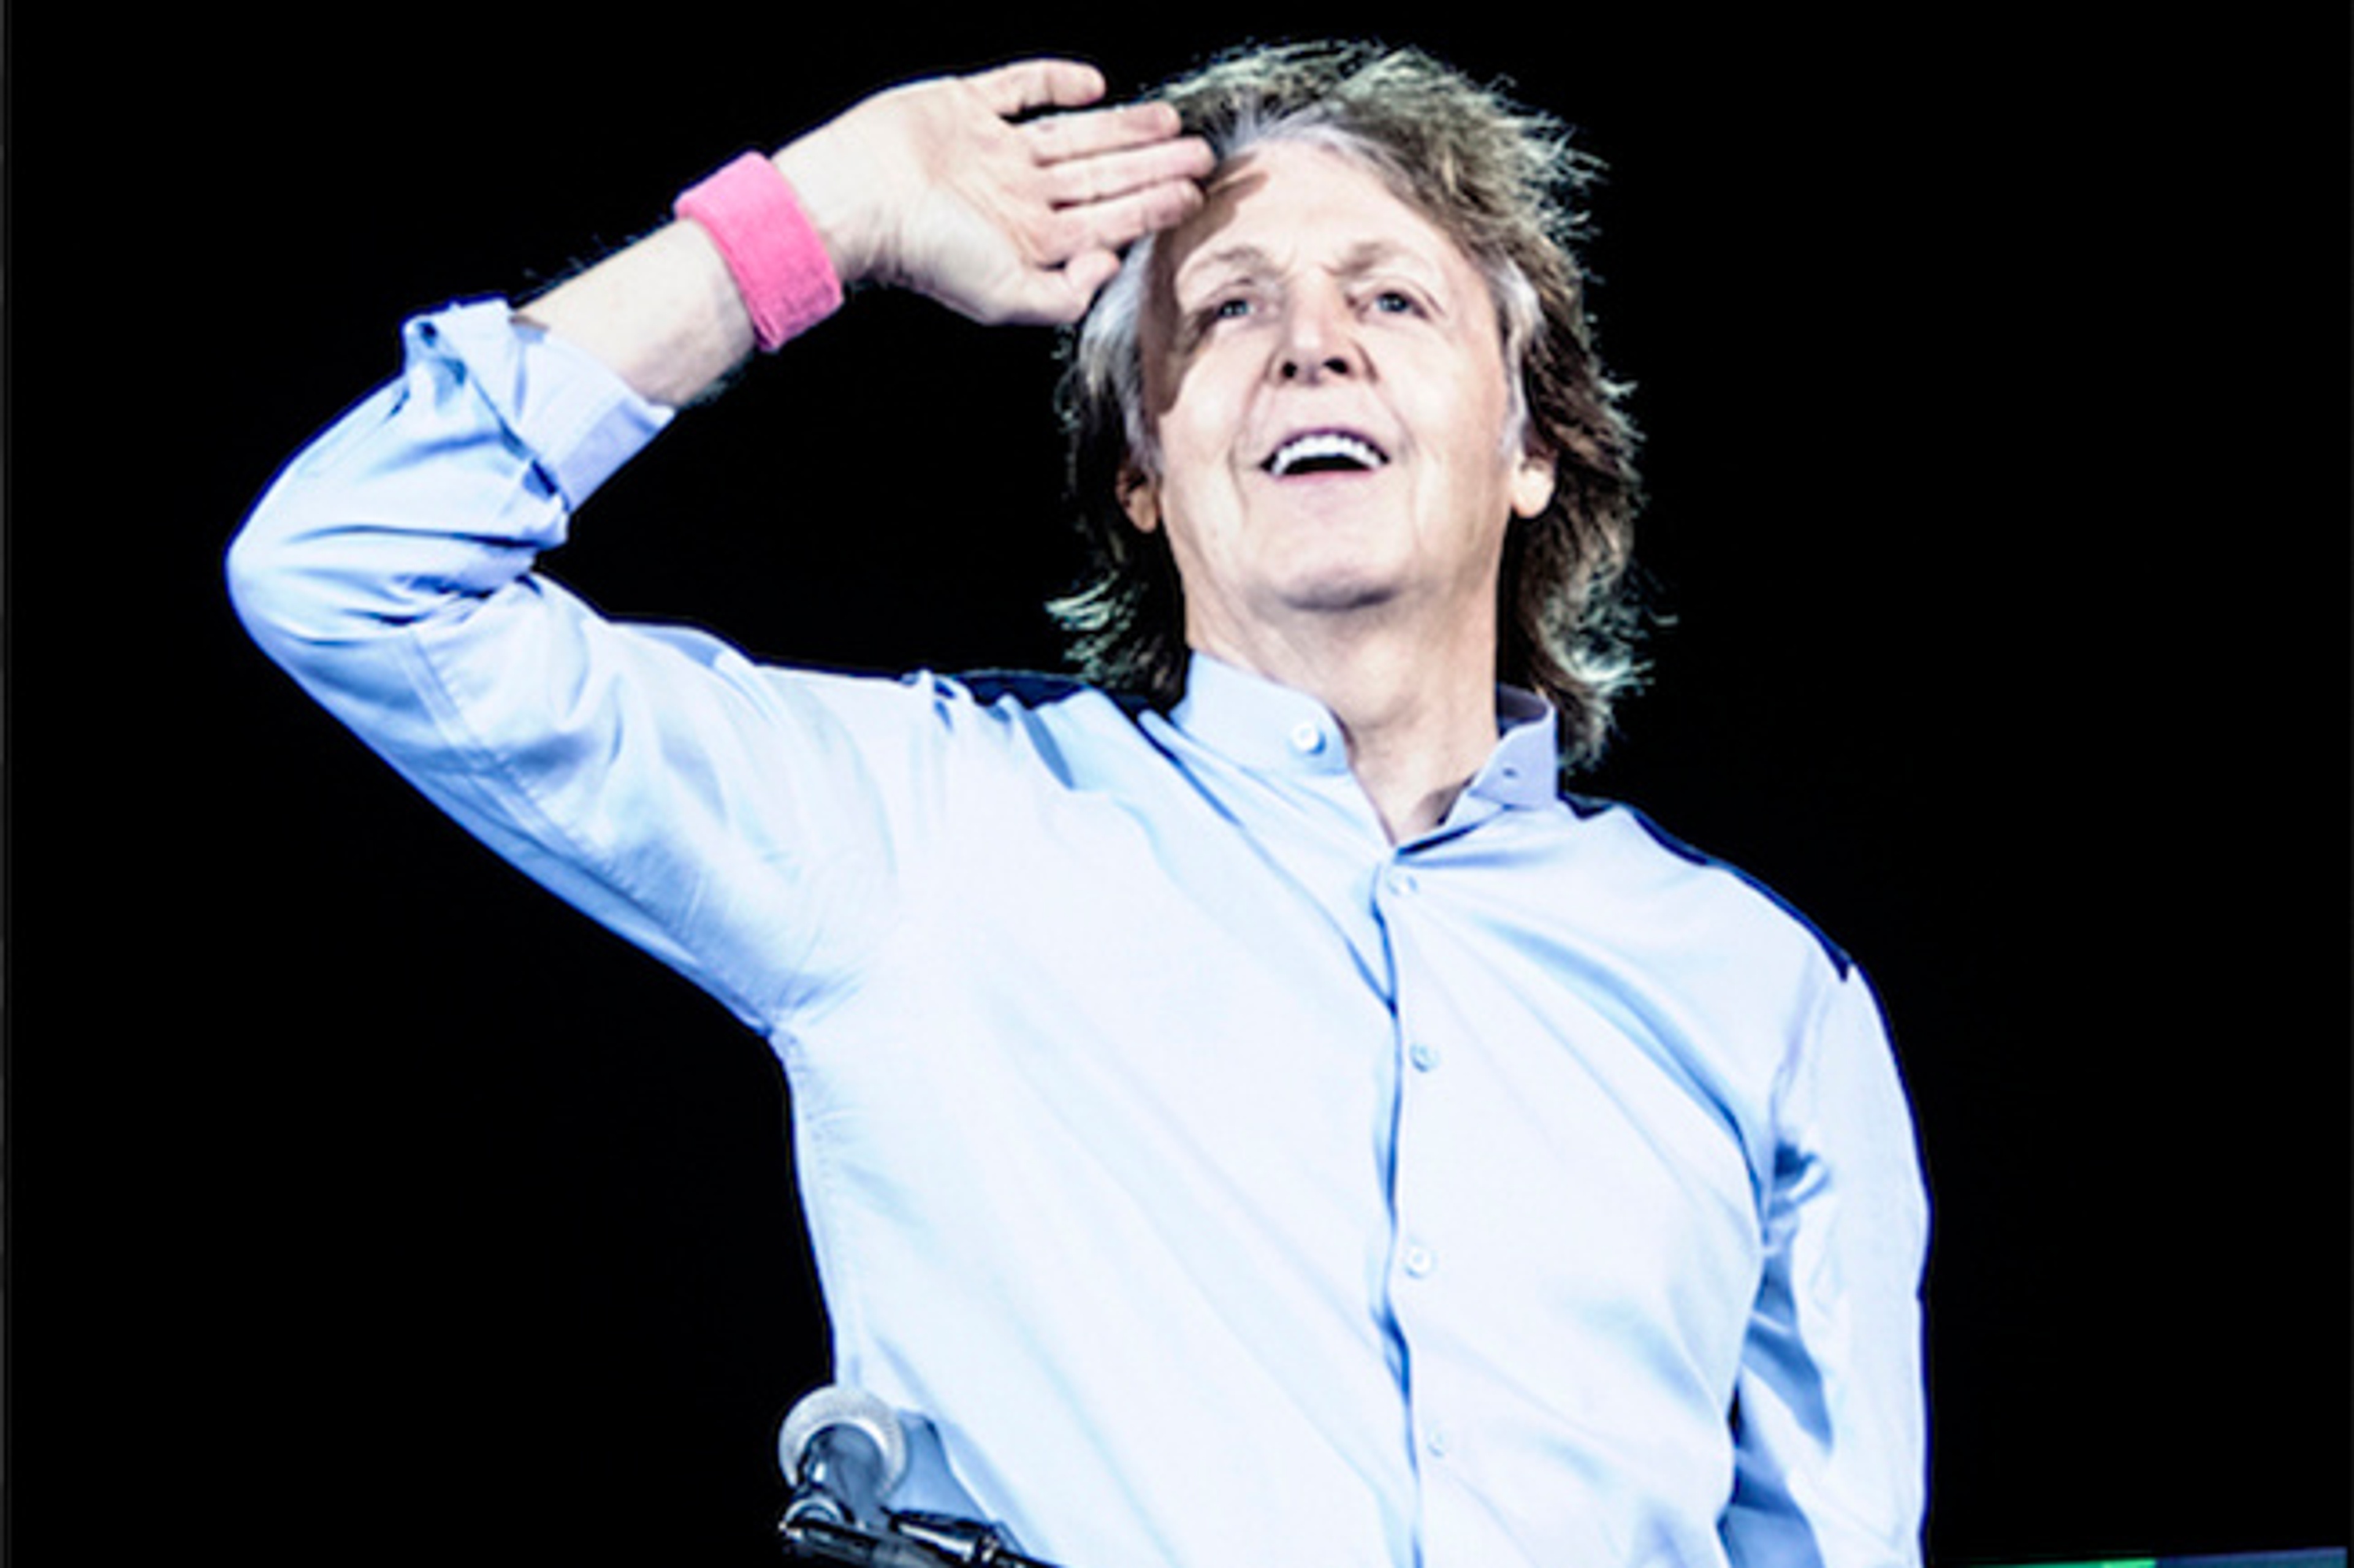 Paul McCartney and his band support Breast Cancer Awareness Month